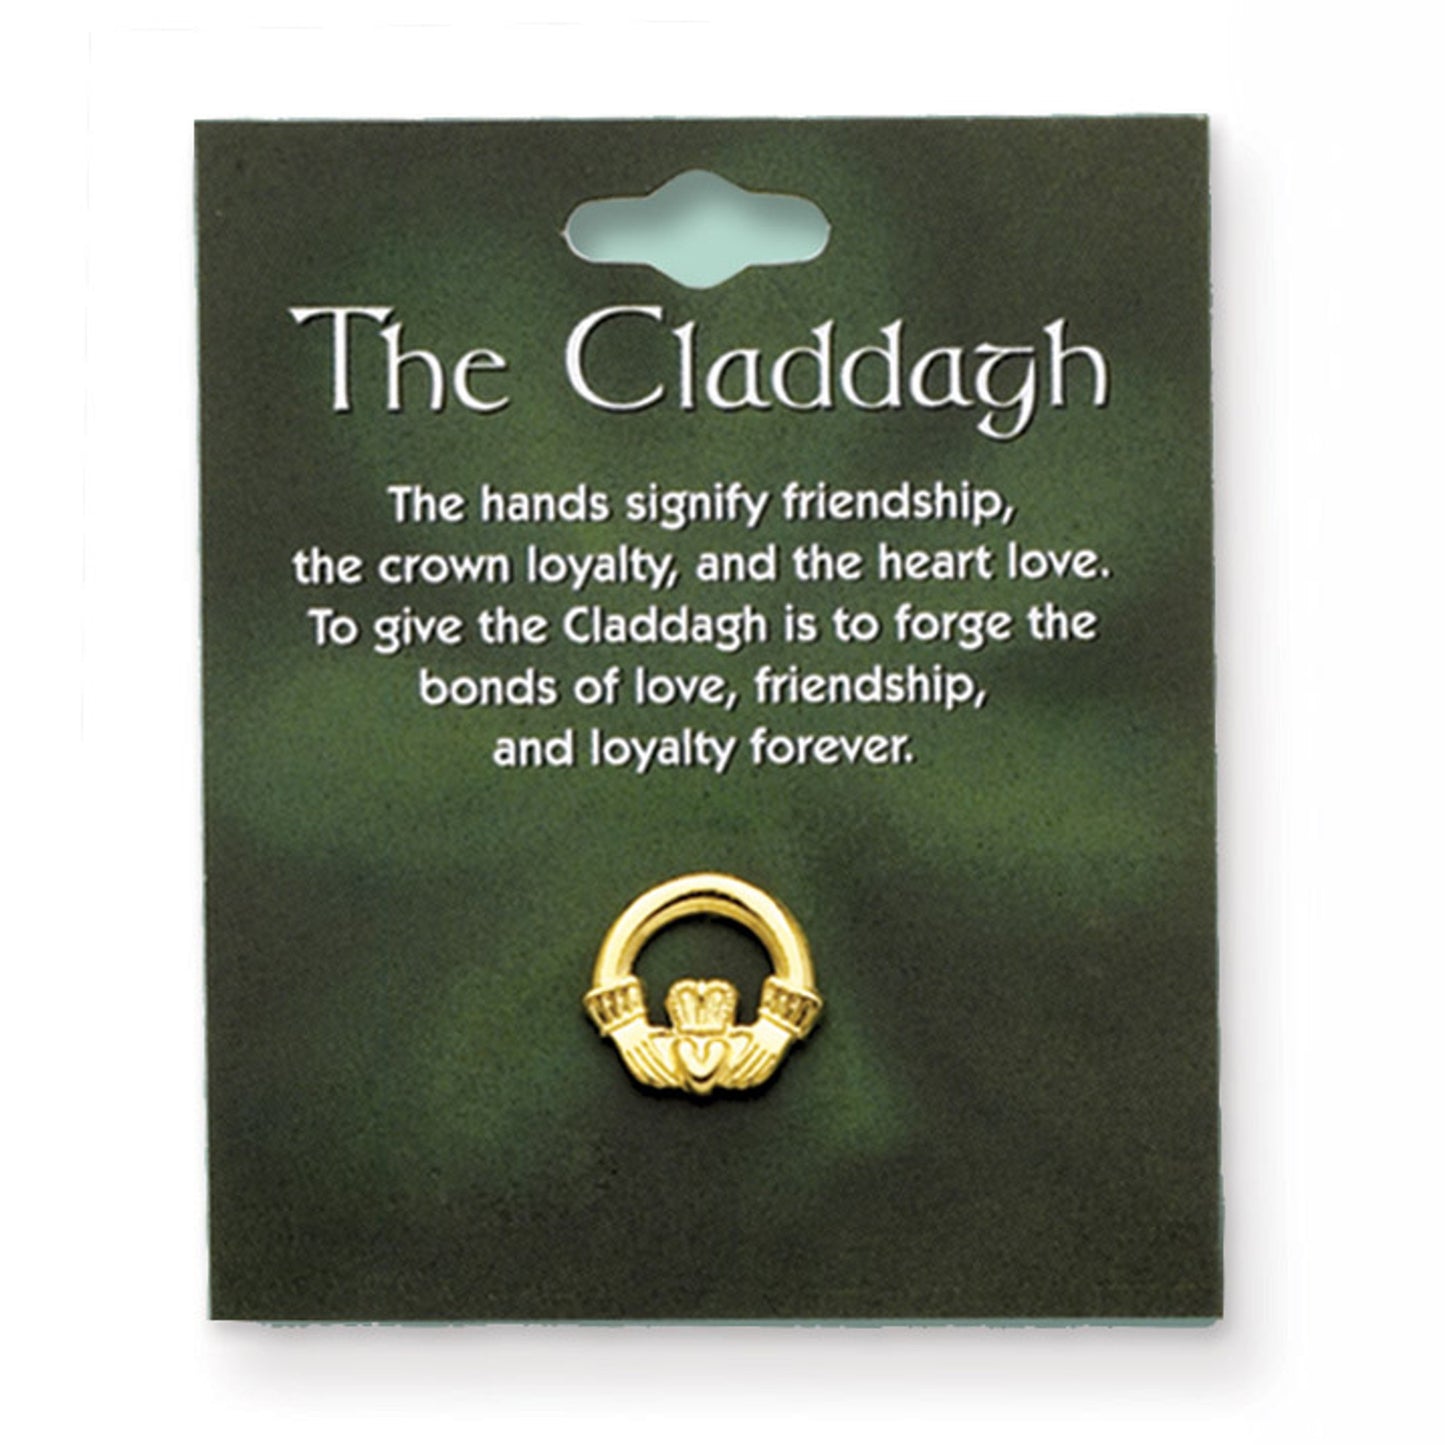 The Claddagh Lapel Pin